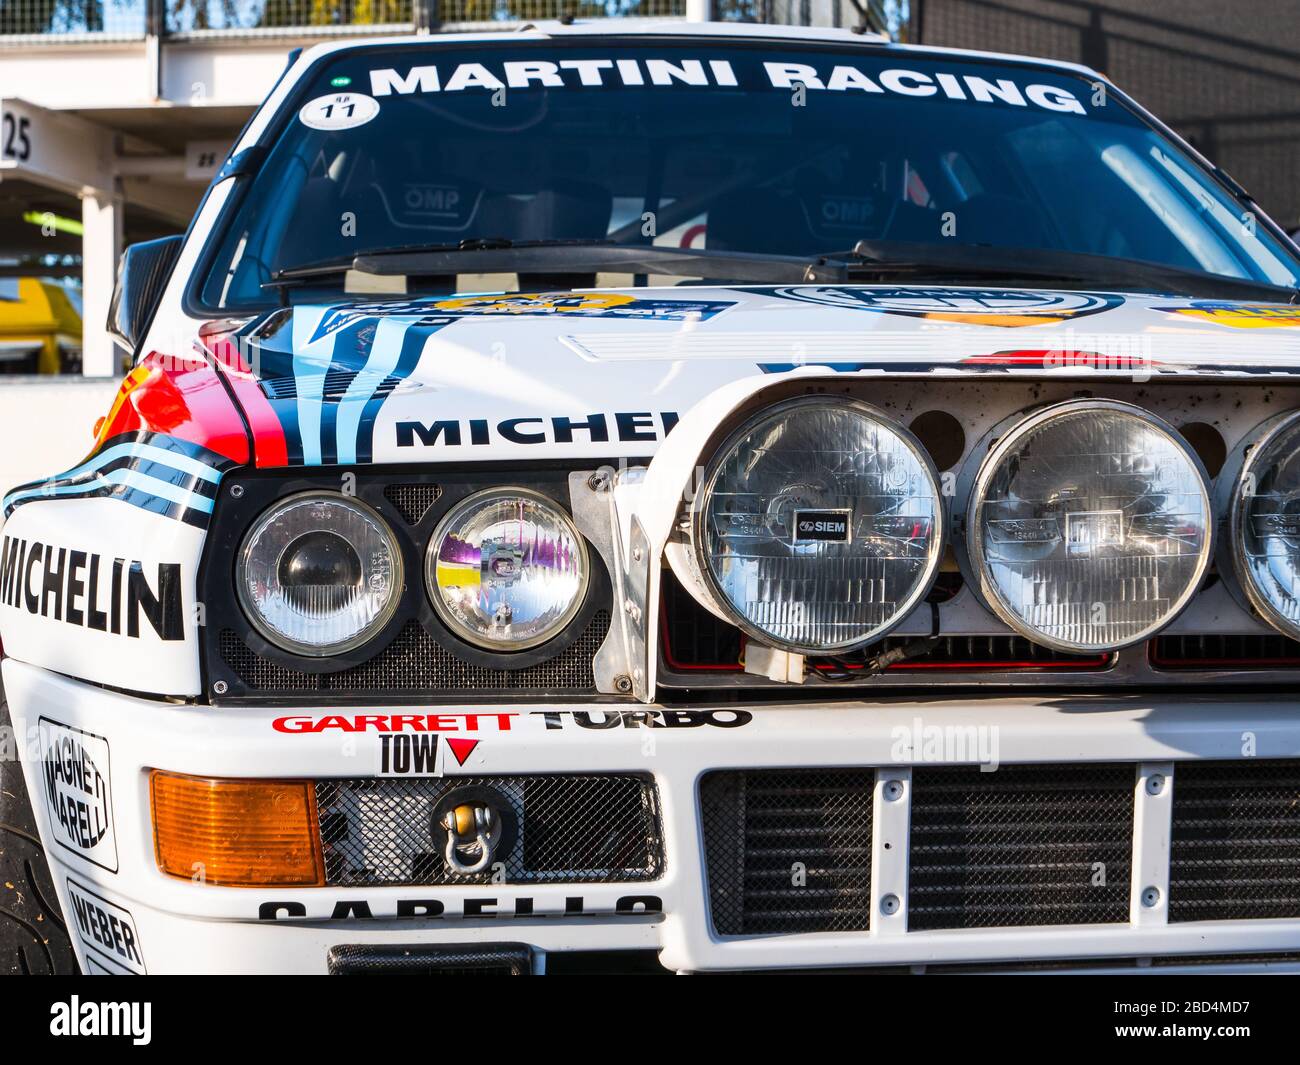 Lancia Delta rally car, Goodwood breakfast club, West Sussex UK 2019 Stock Photo